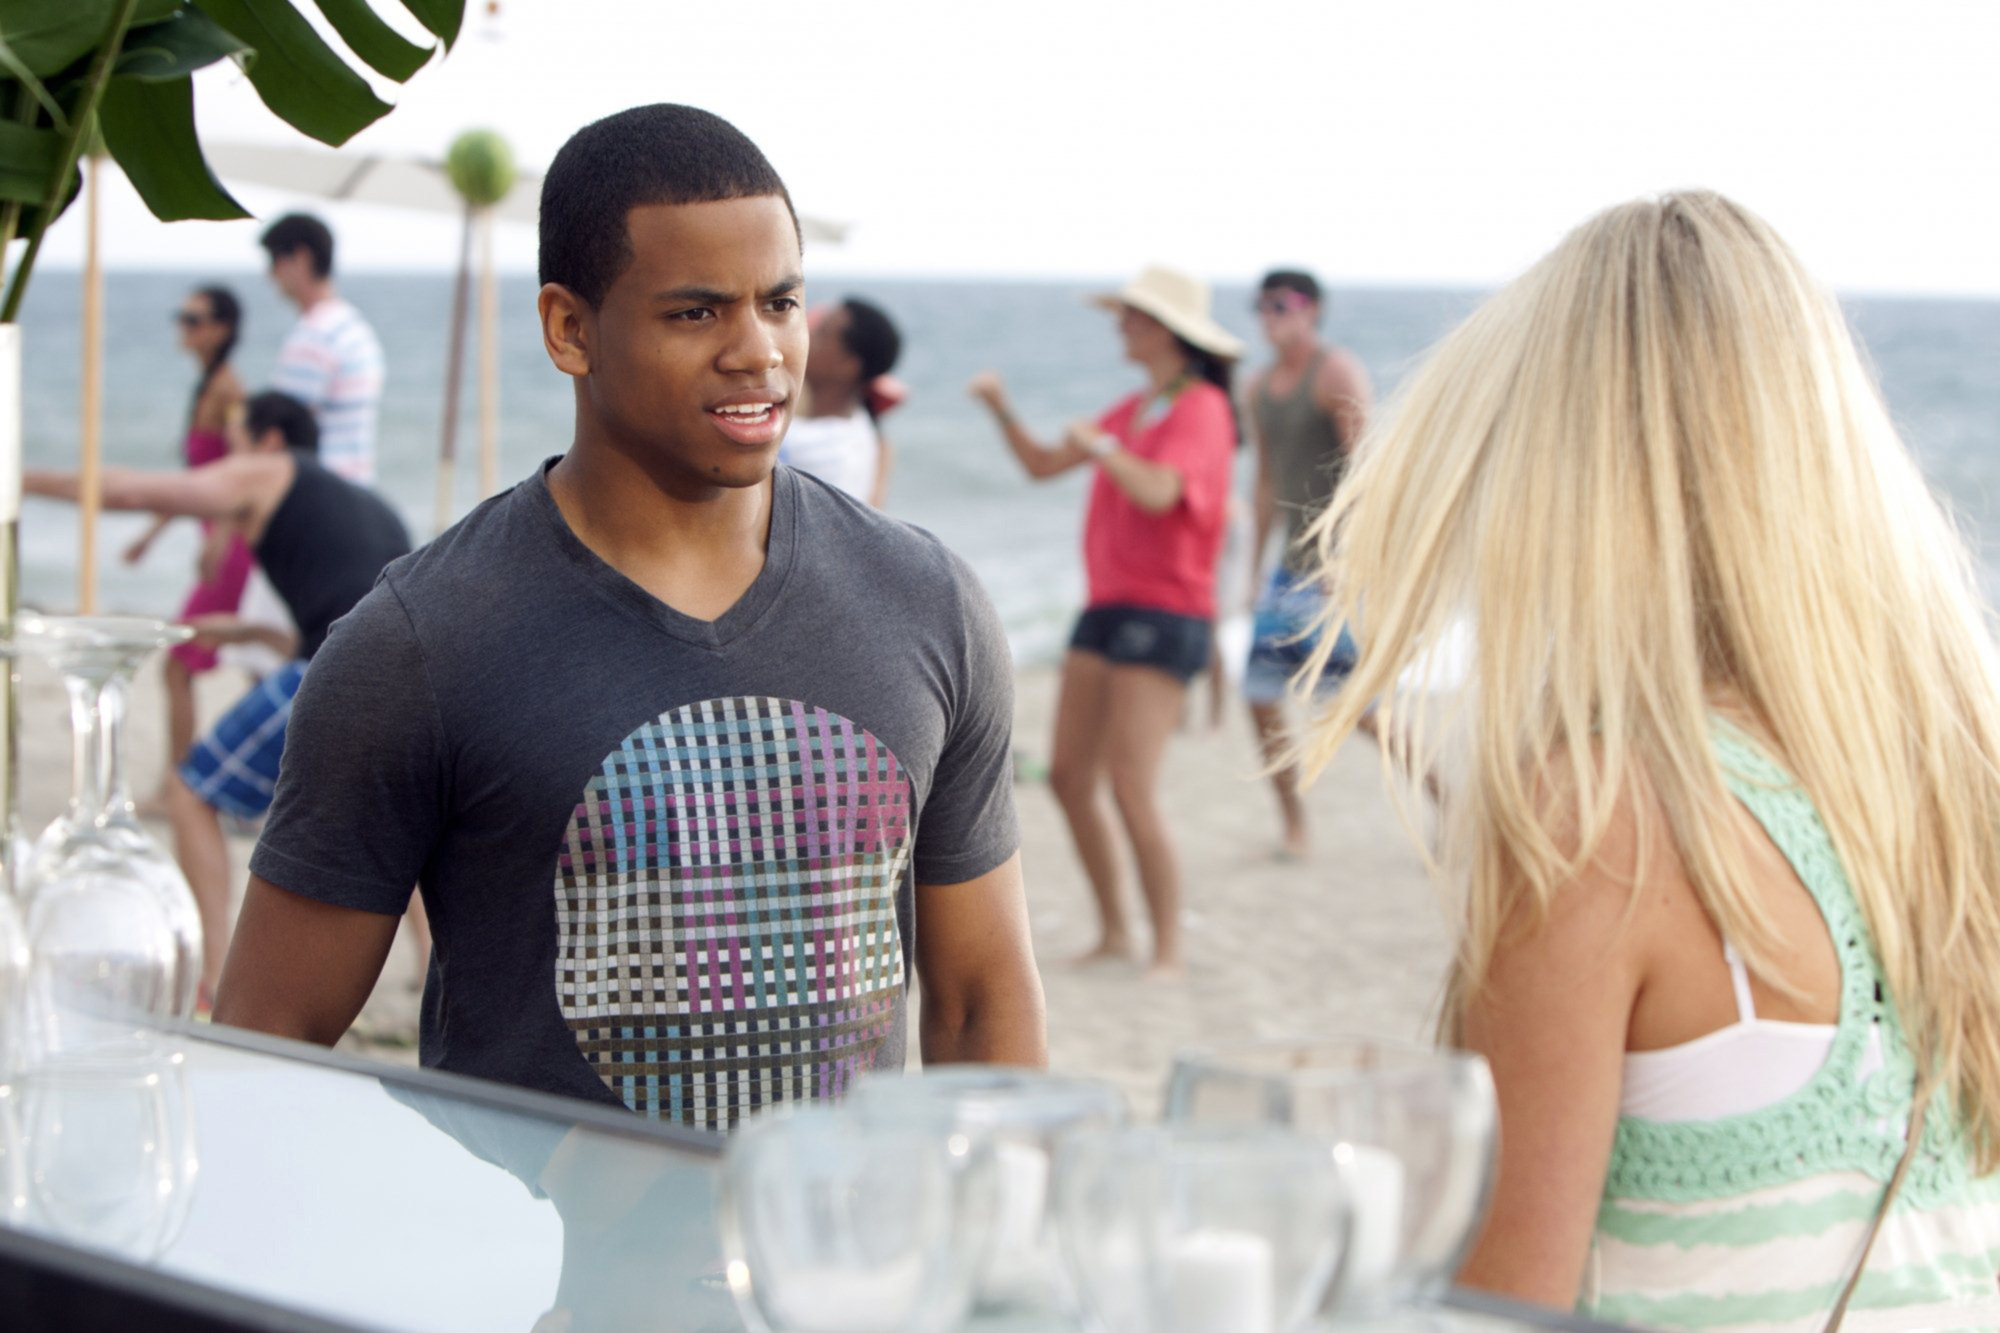 Wilds on the beach with a costar for a scene